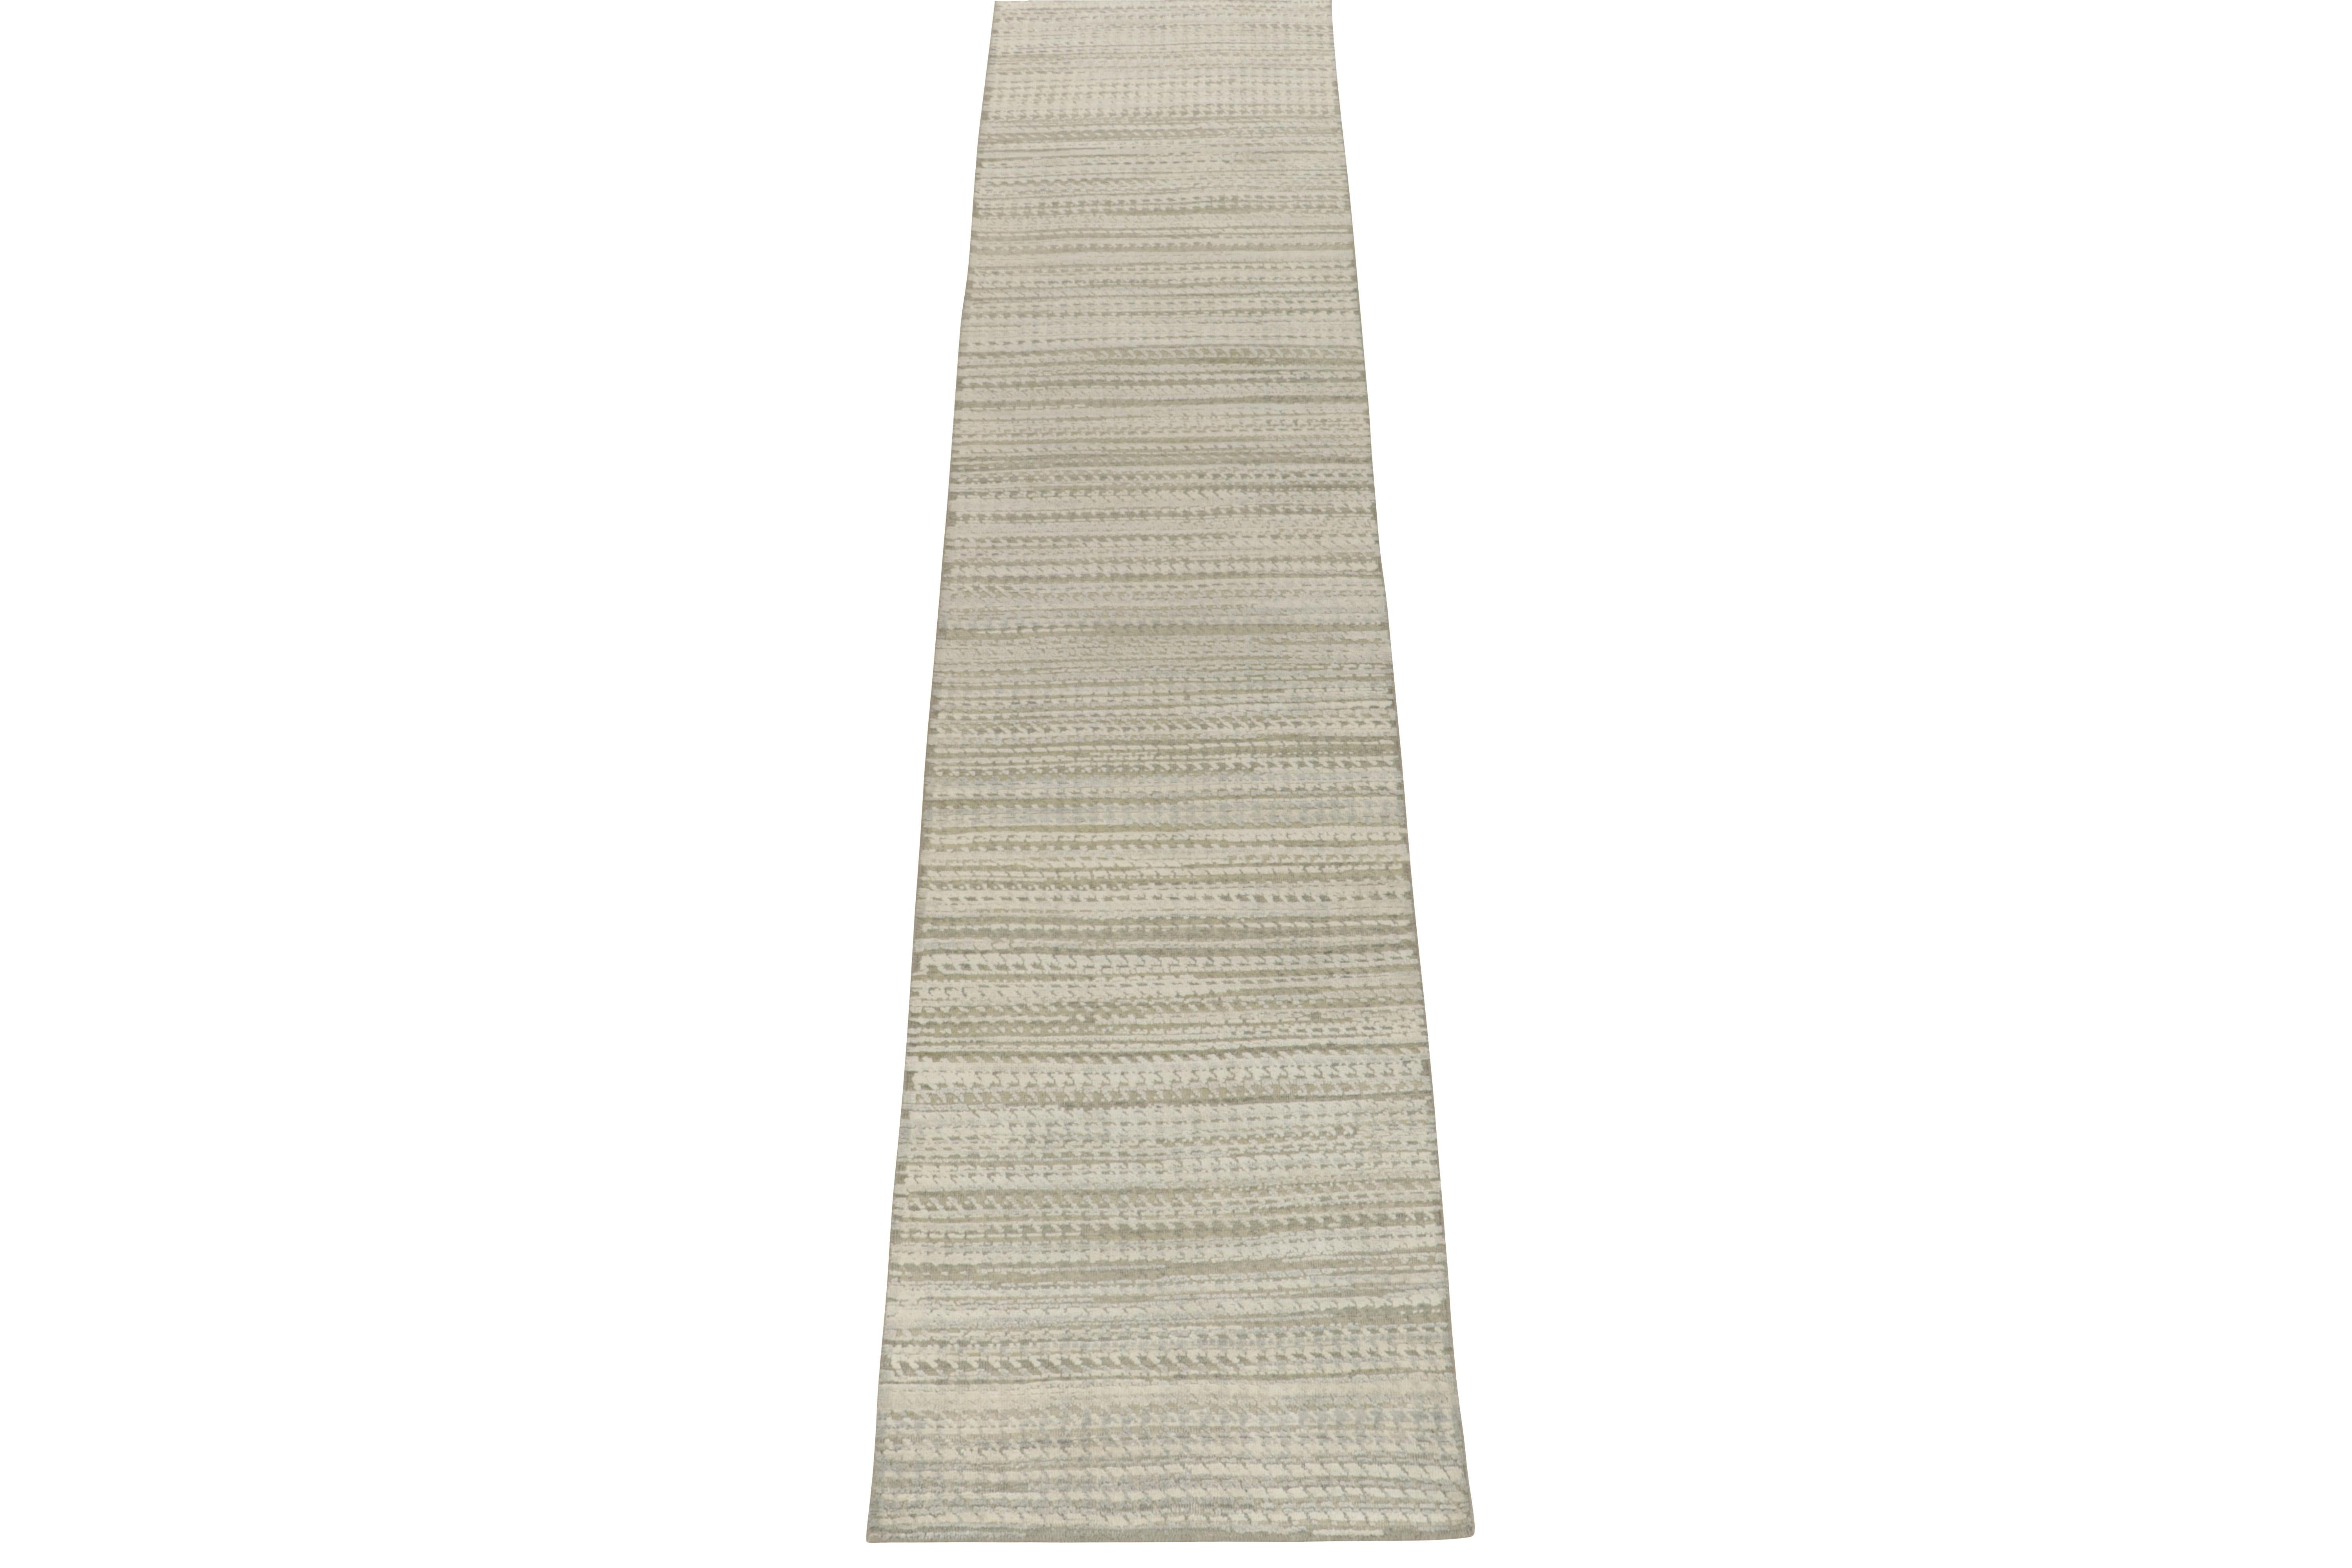 Hand knotted in a fine blend of wool & silk, a scintillating 2x12 runner from Rug & Kilim’s bold modern selections. 

On the Design: The crisp of gray and white plays with the sharp geometric pattern in an alluring high-low texture. A keen eye may